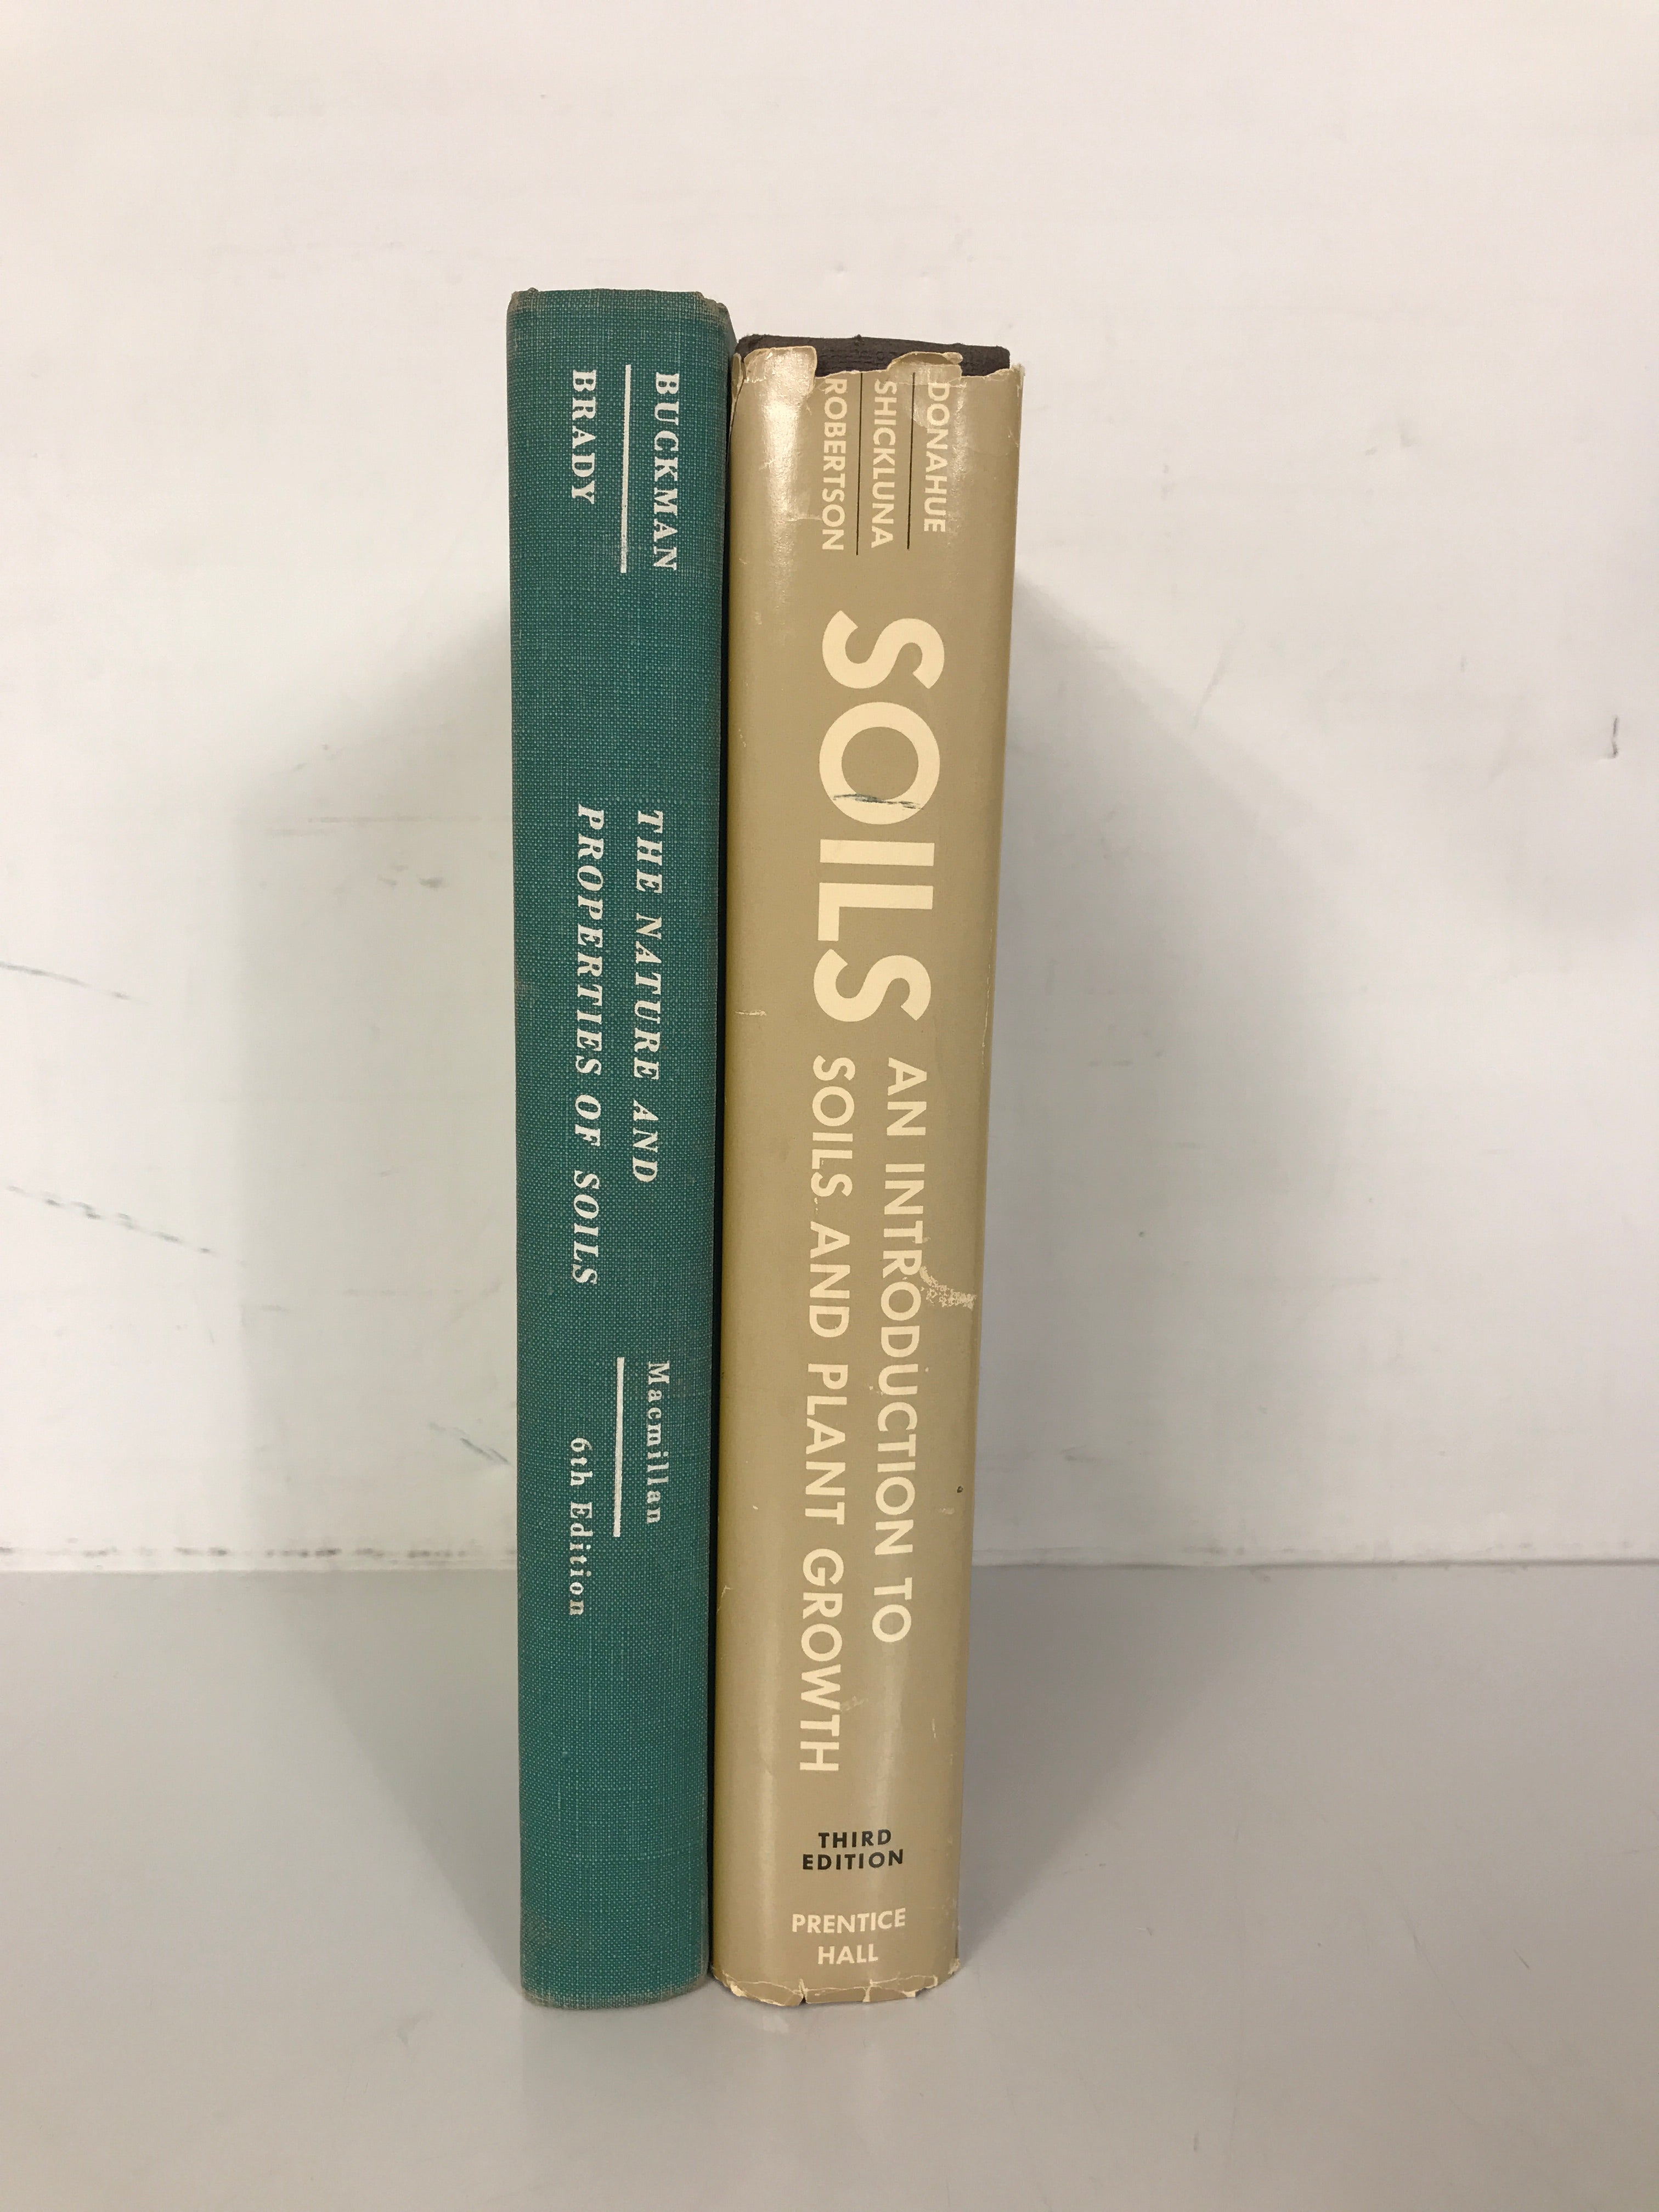 Lot of 2: The Nature and Properties of Soils 1960, 1st & Soils 1971, 3rd HC DJ